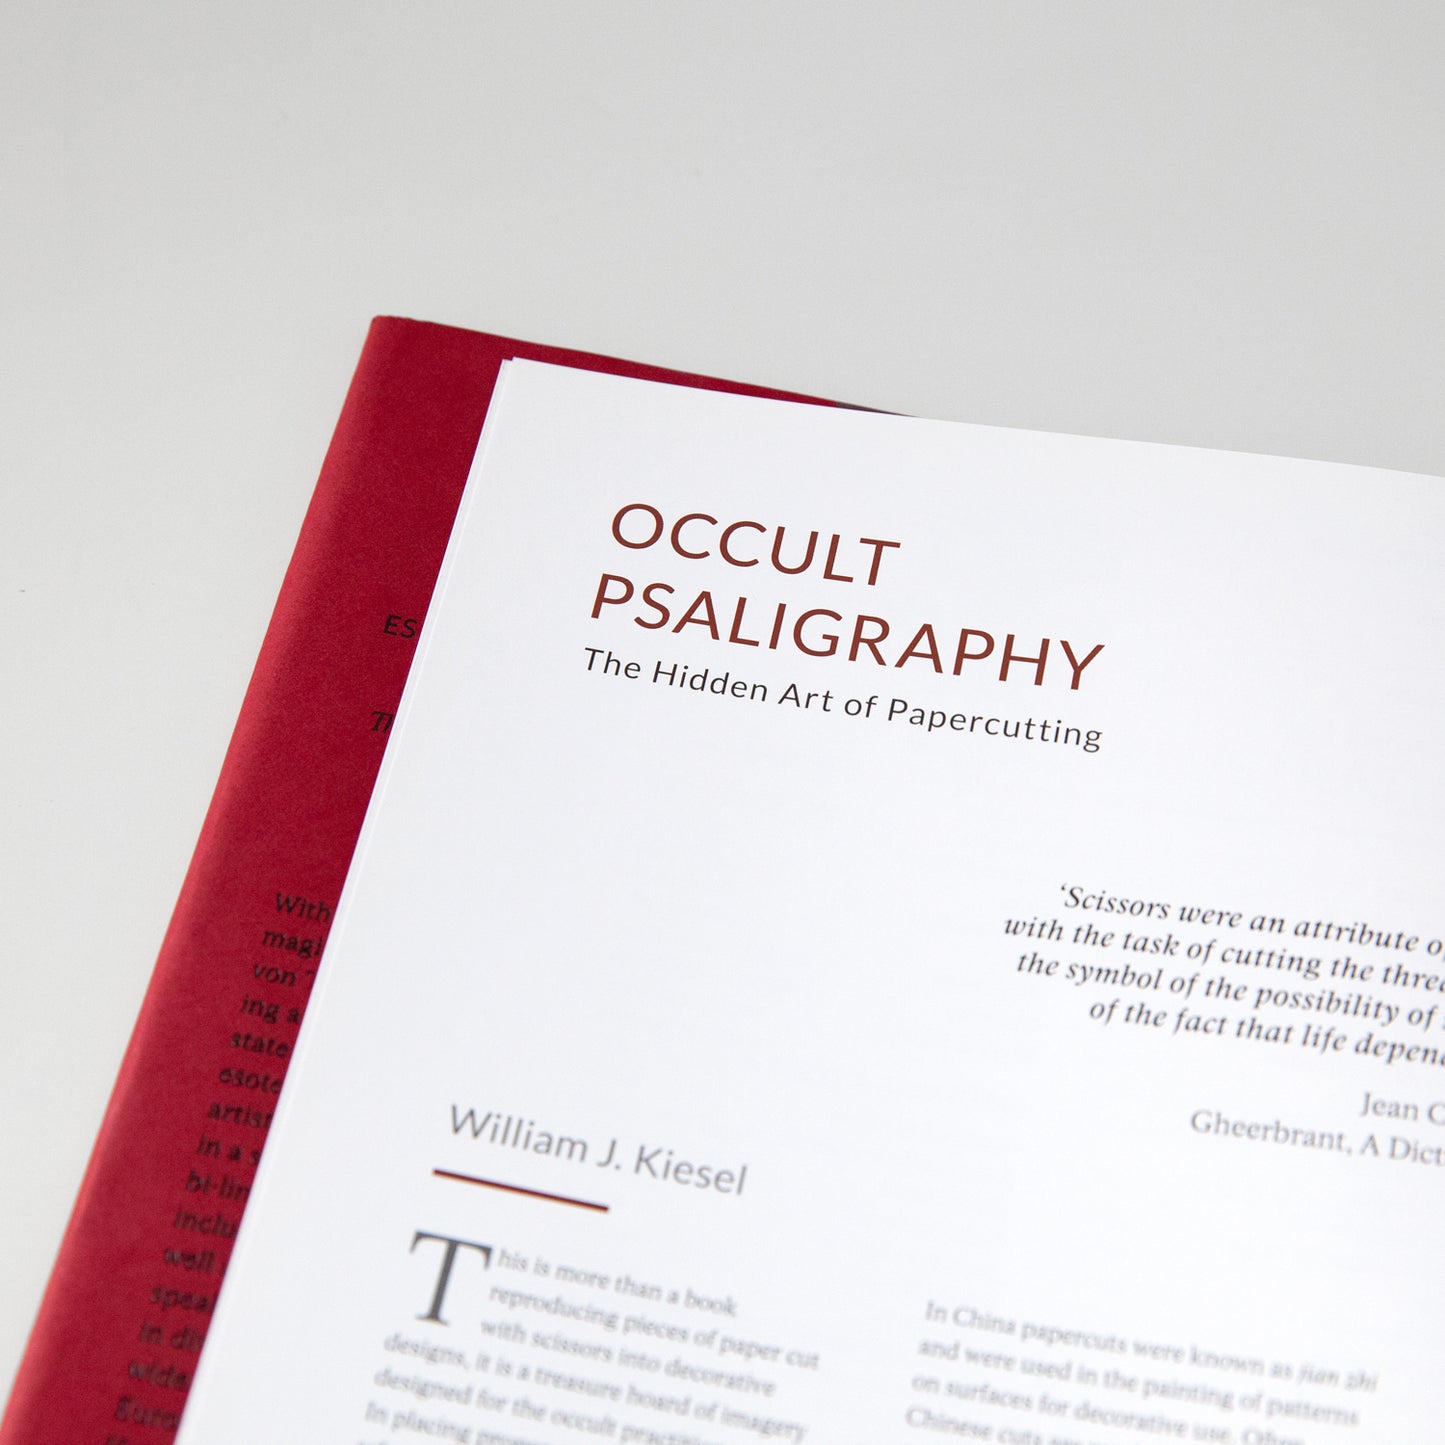 Occult Psaligraphy